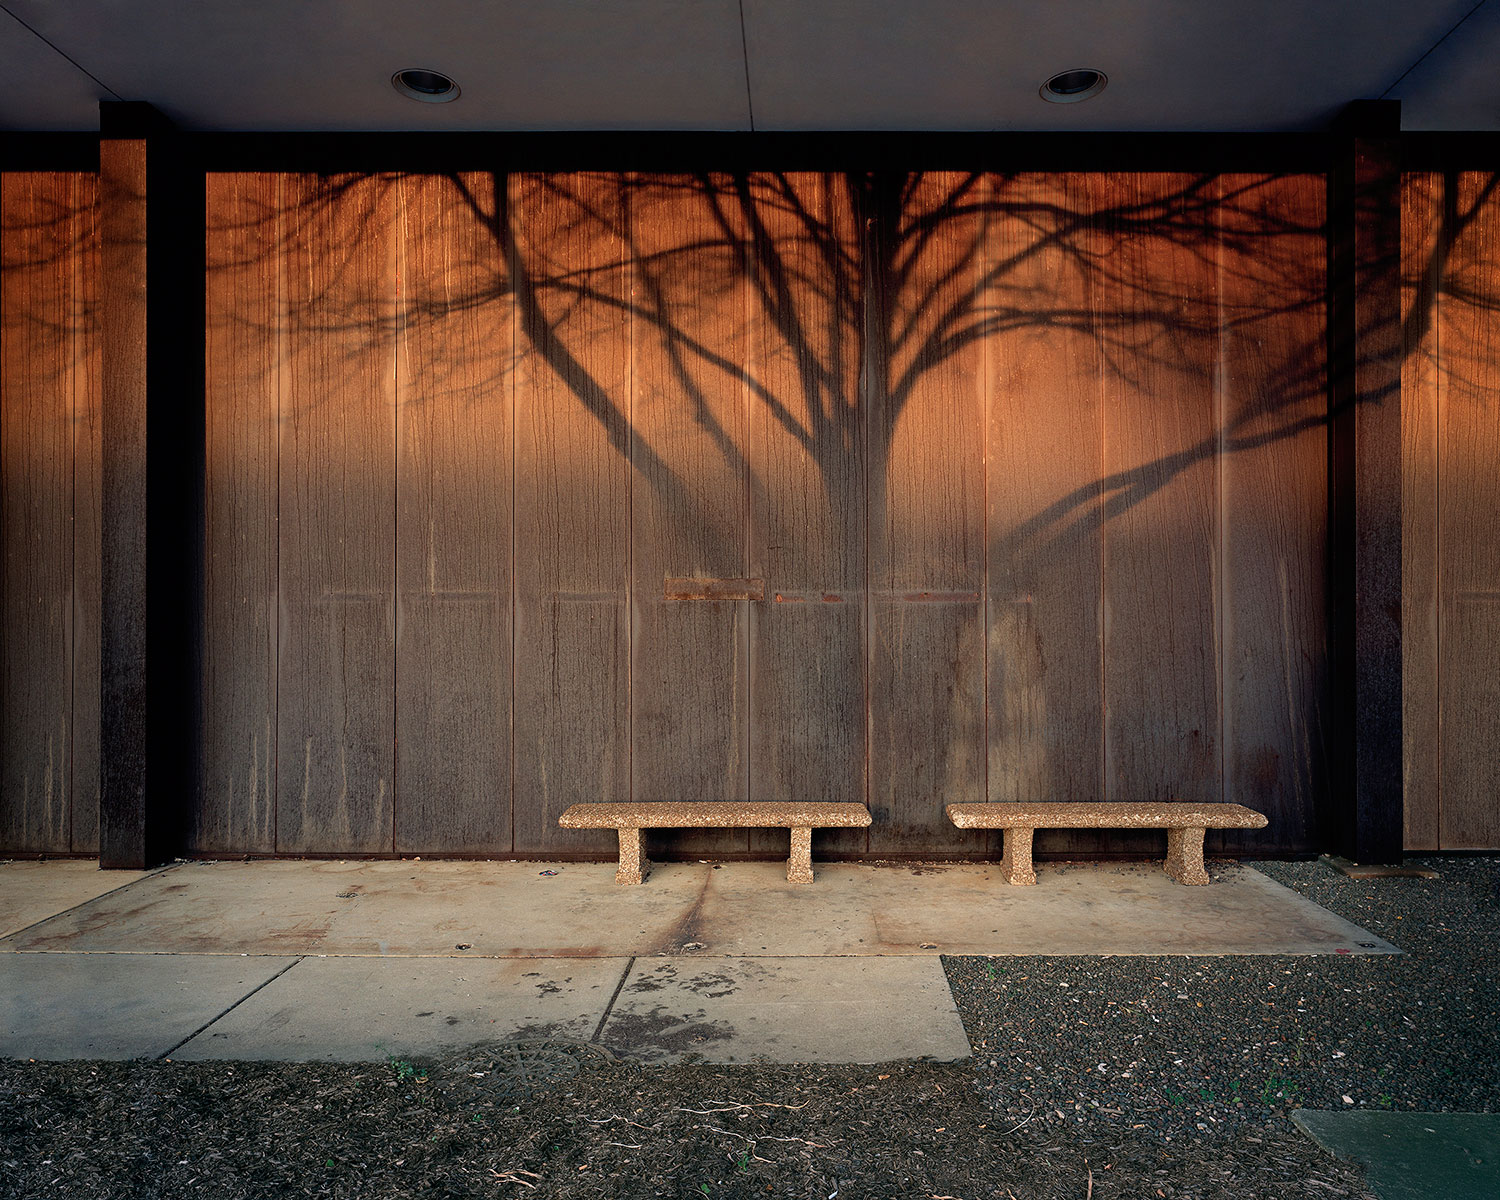 Nate Mathews, Sunset, Tree Shadow, and Benches, 2009. Inkjet print, 24 x 30 in.